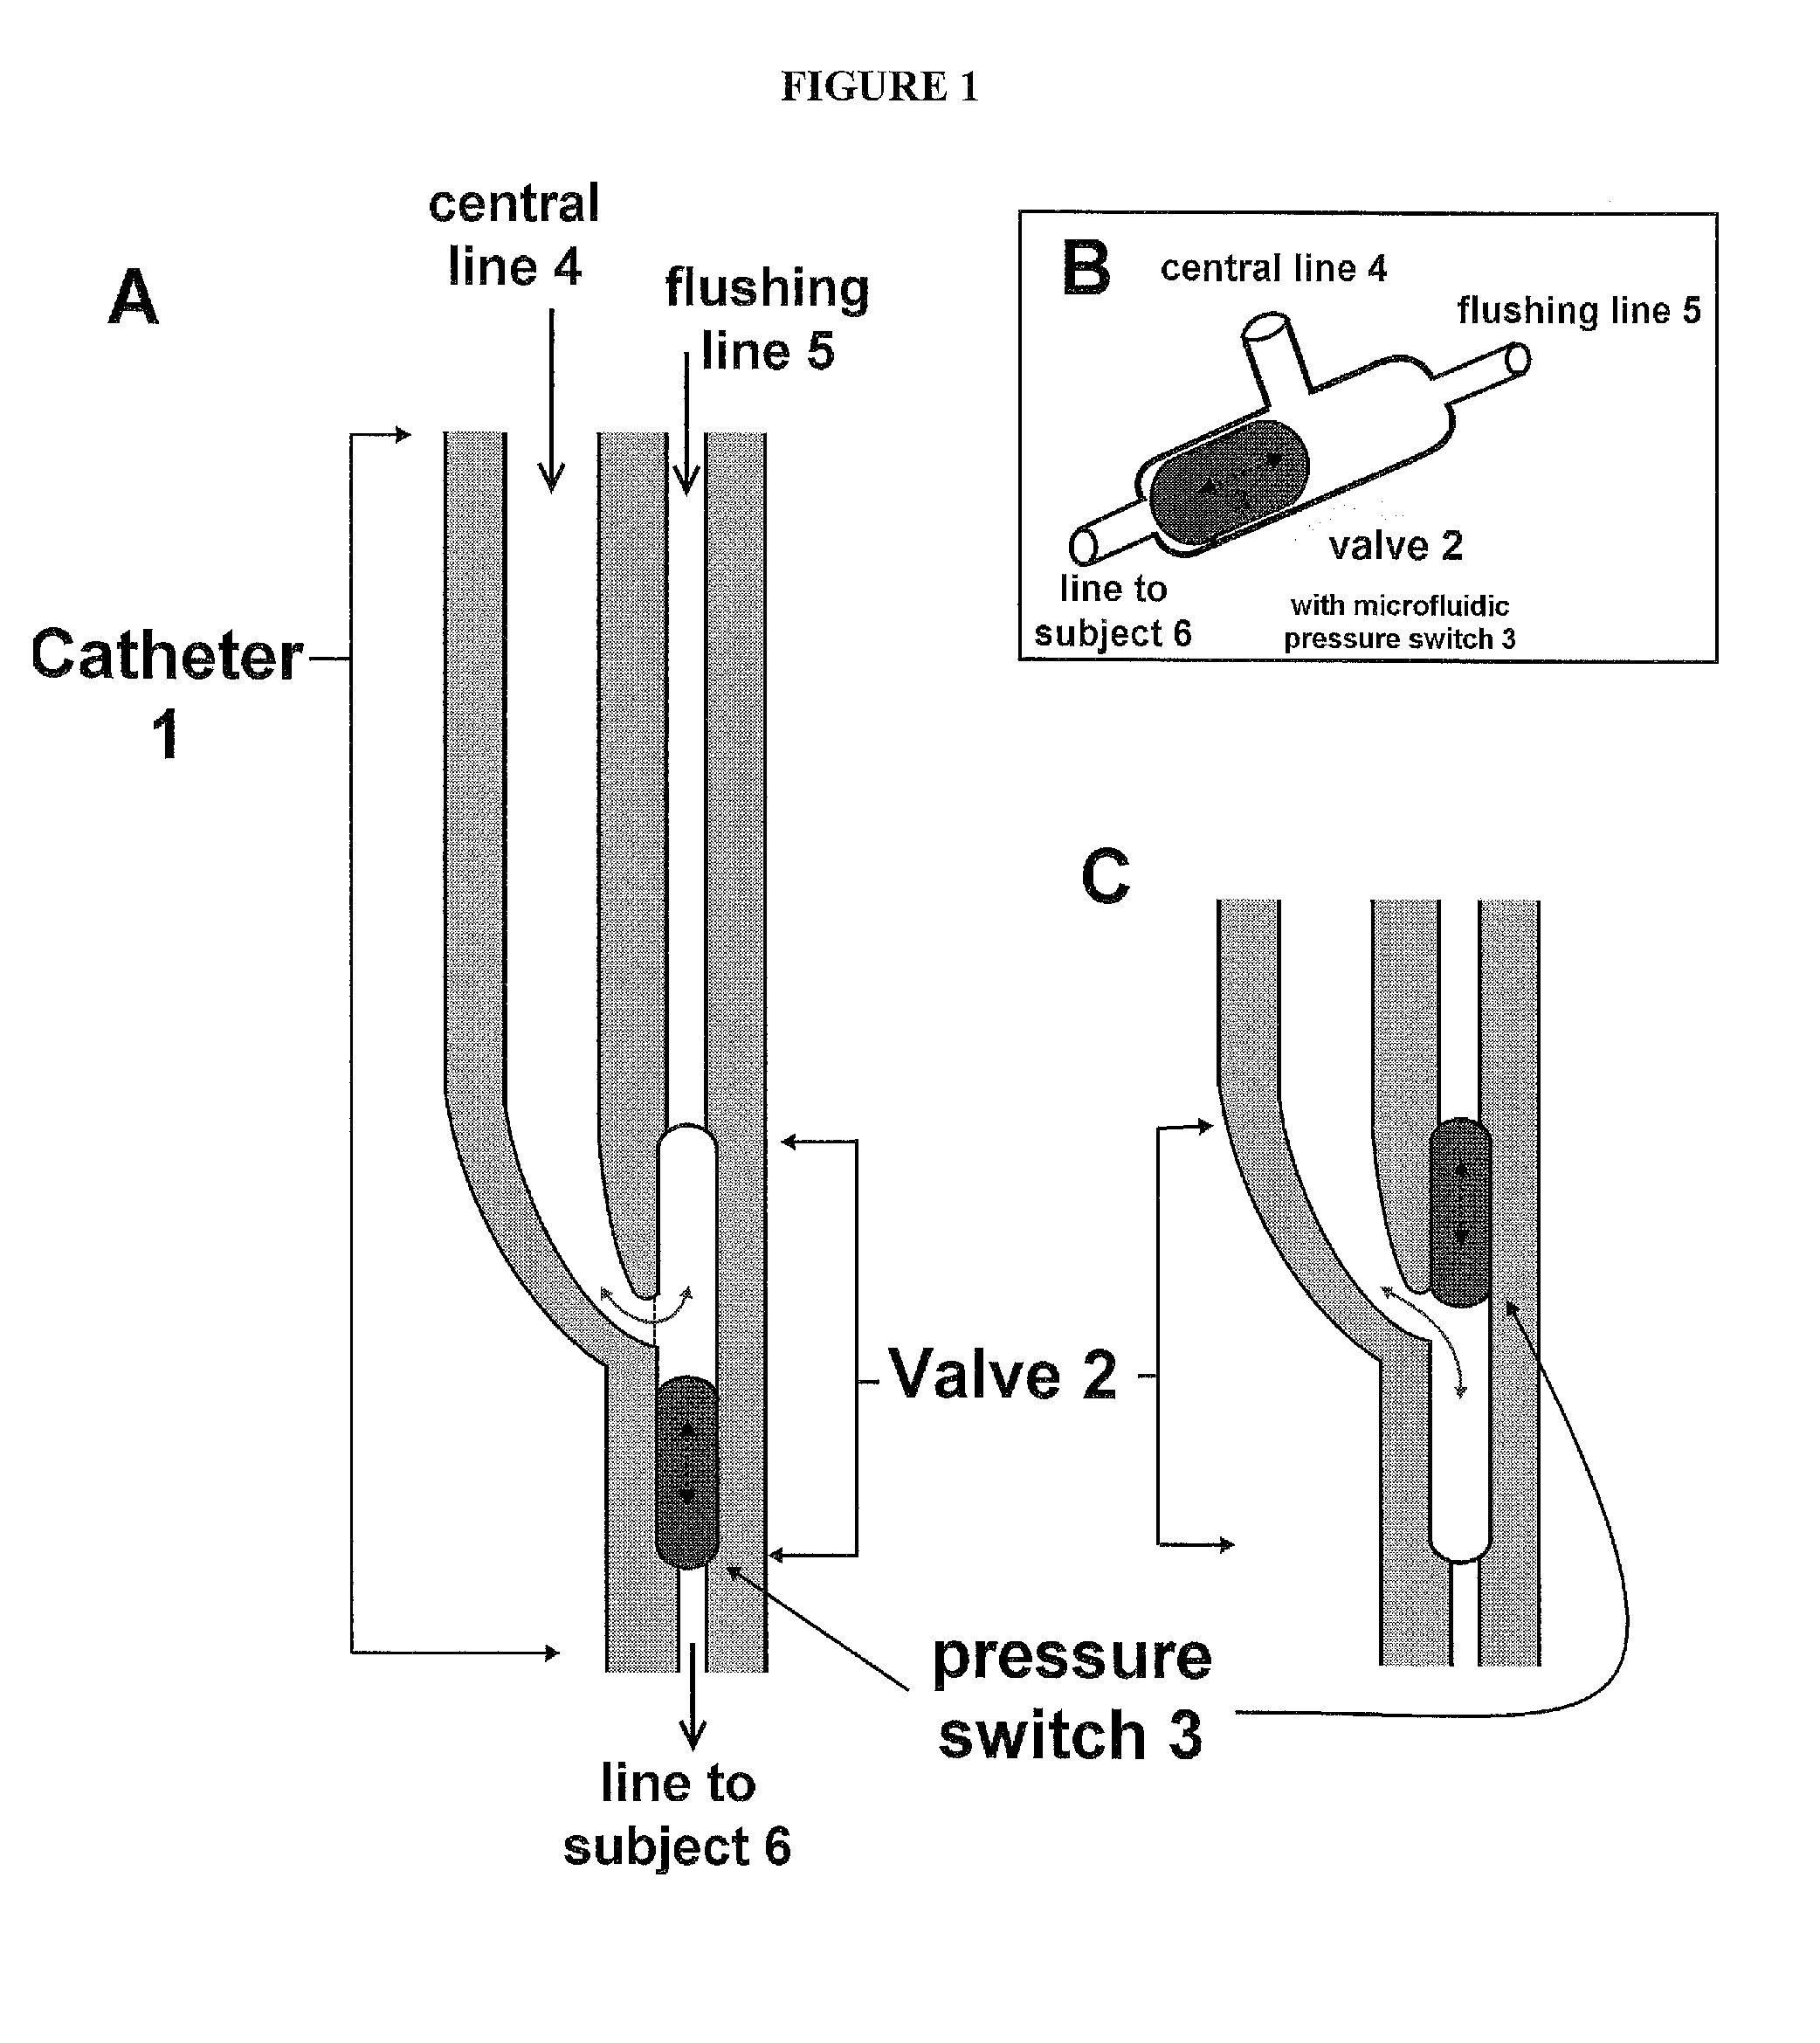 Flushable catheter affixed to a wash line activated by a microfluidic pressure switch